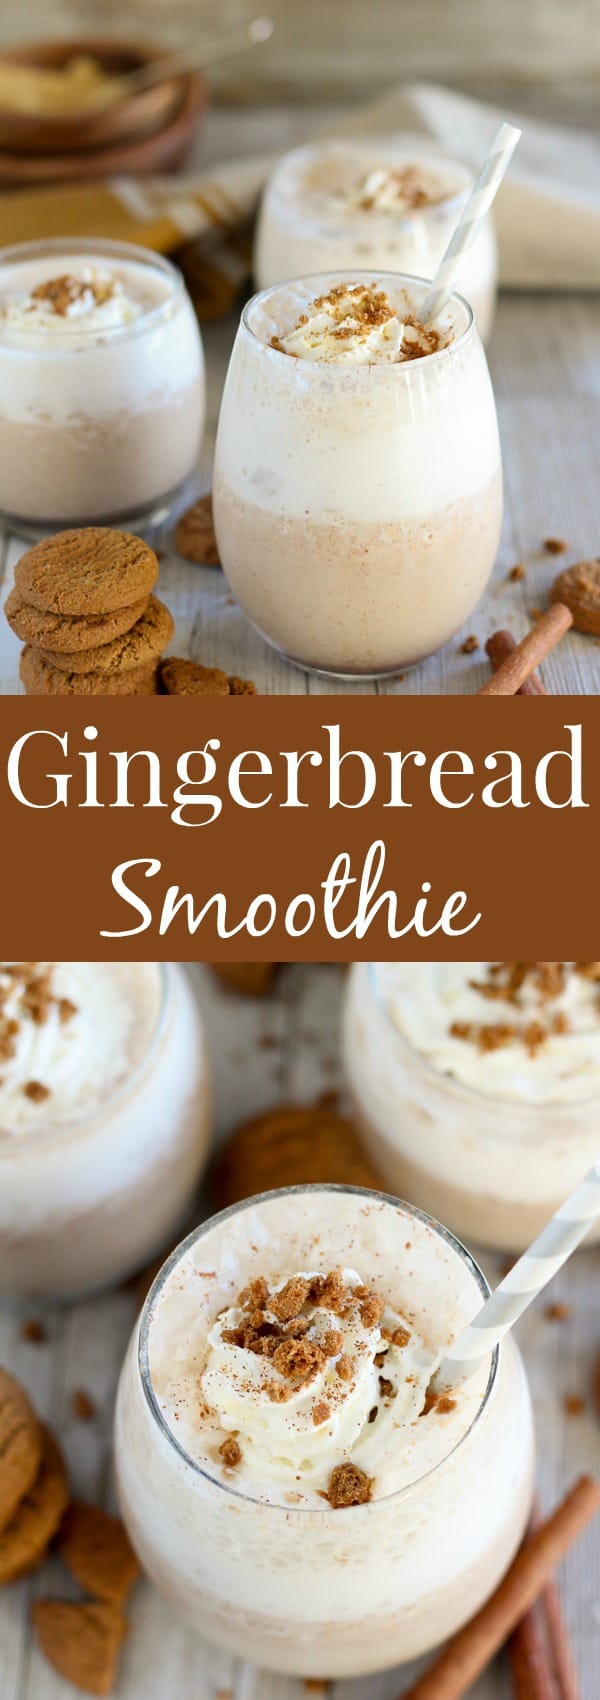 Gingerbread Smoothie